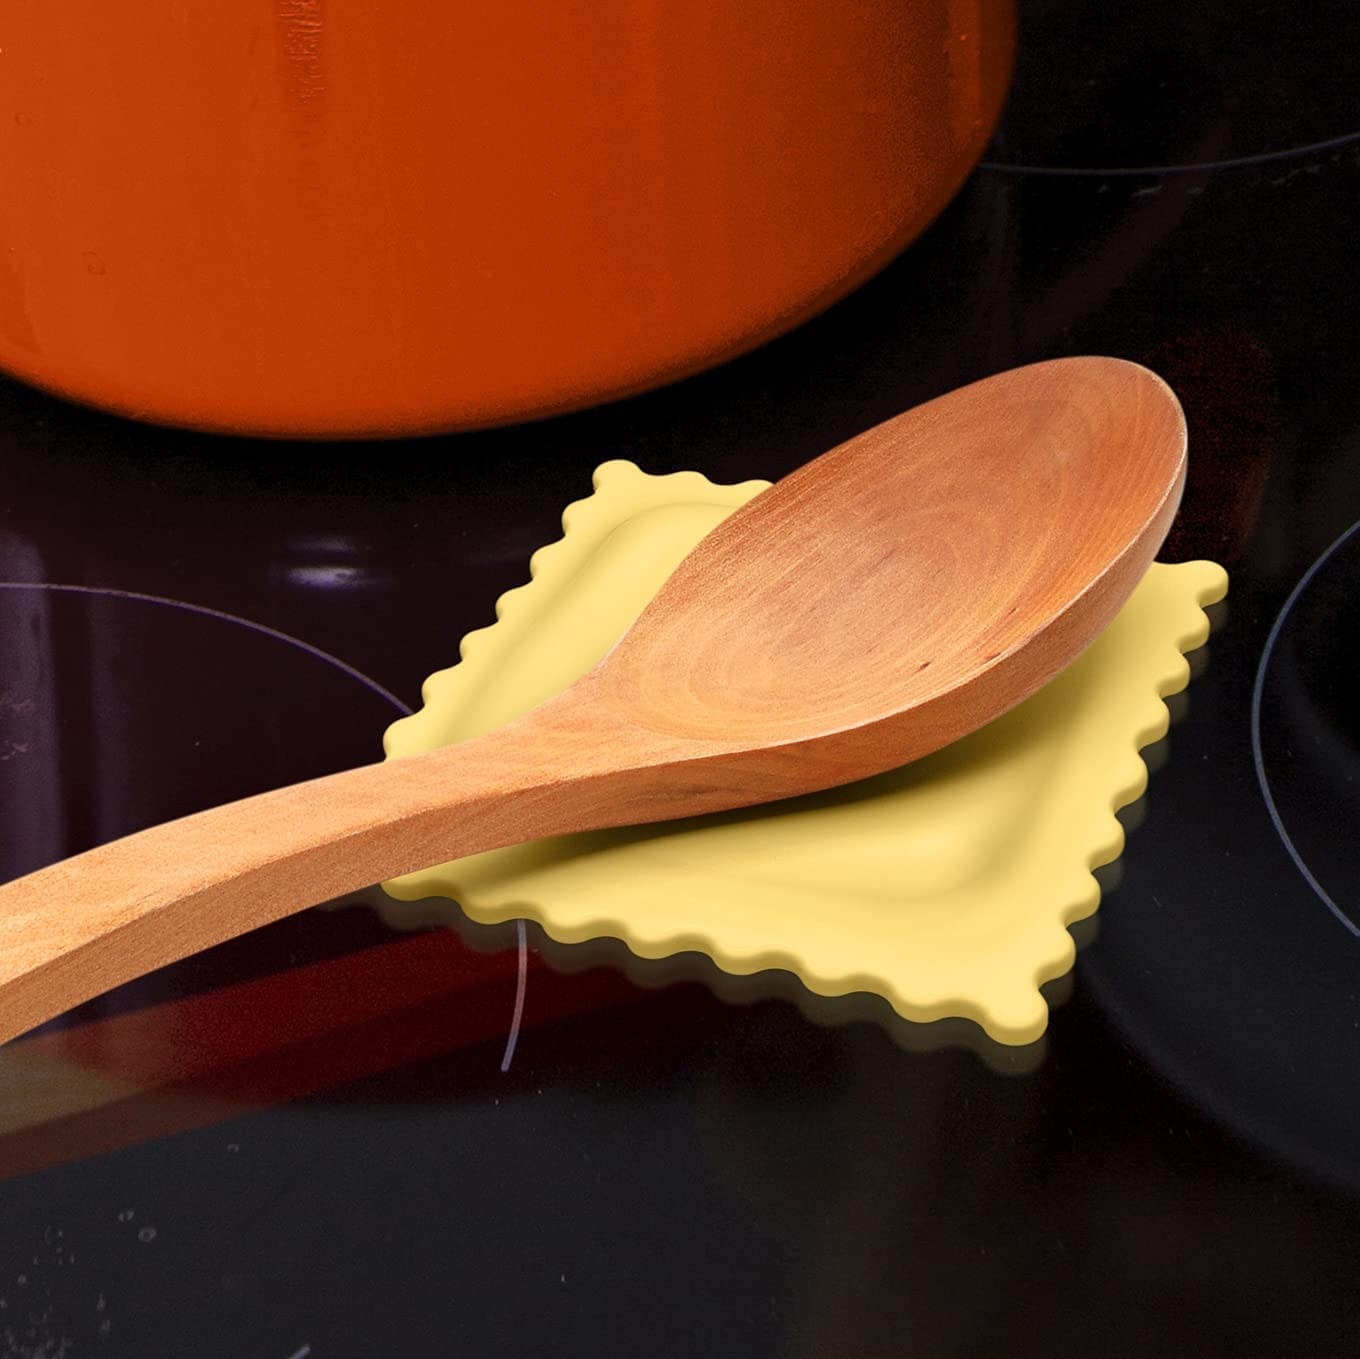 A spoon resting on the pasta themed spoon rest